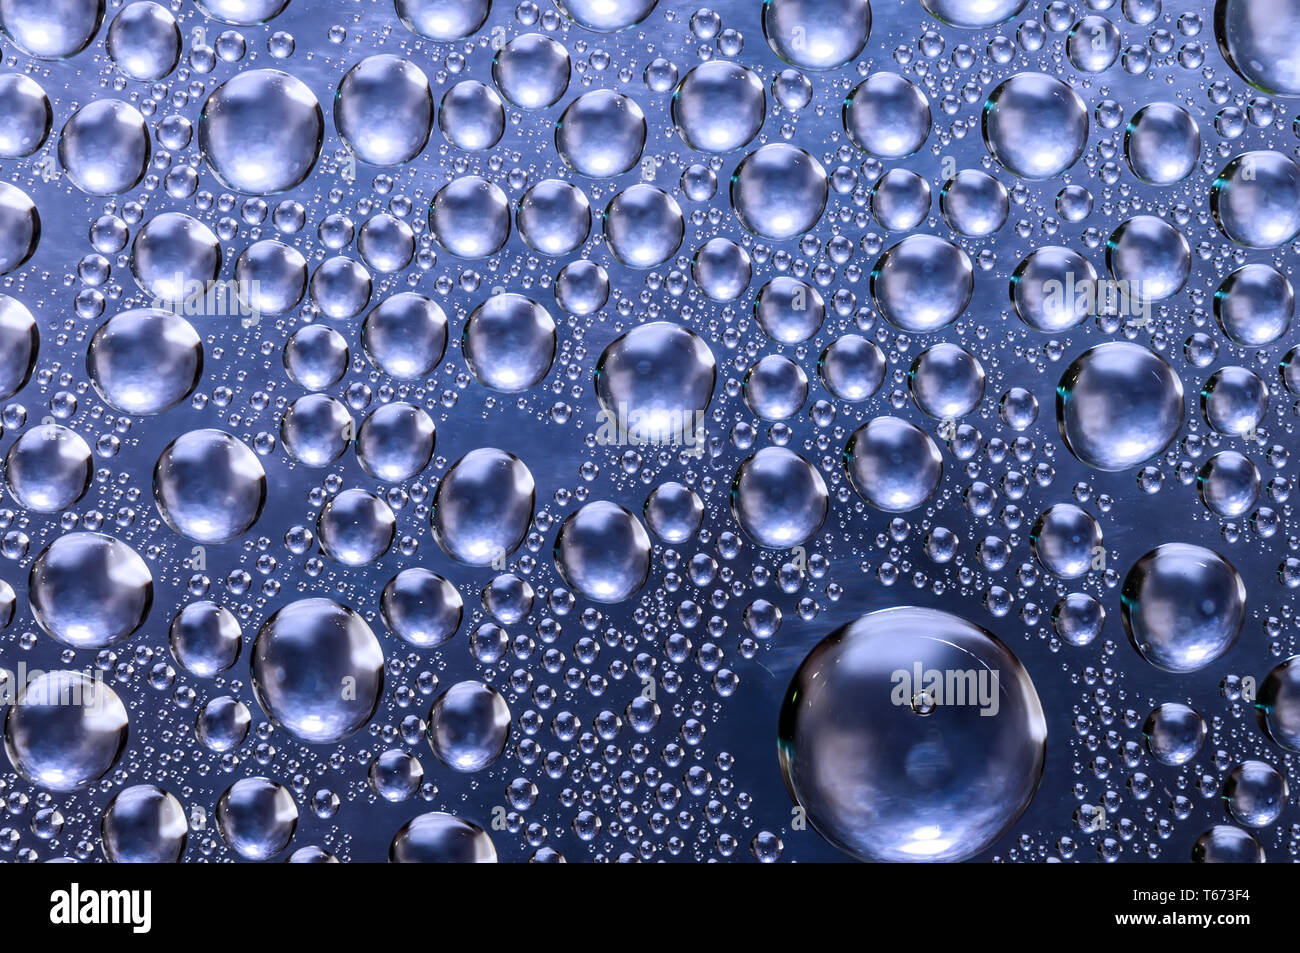 Metallic blue colored wet rainy background, water drops on transparent glass Stock Photo